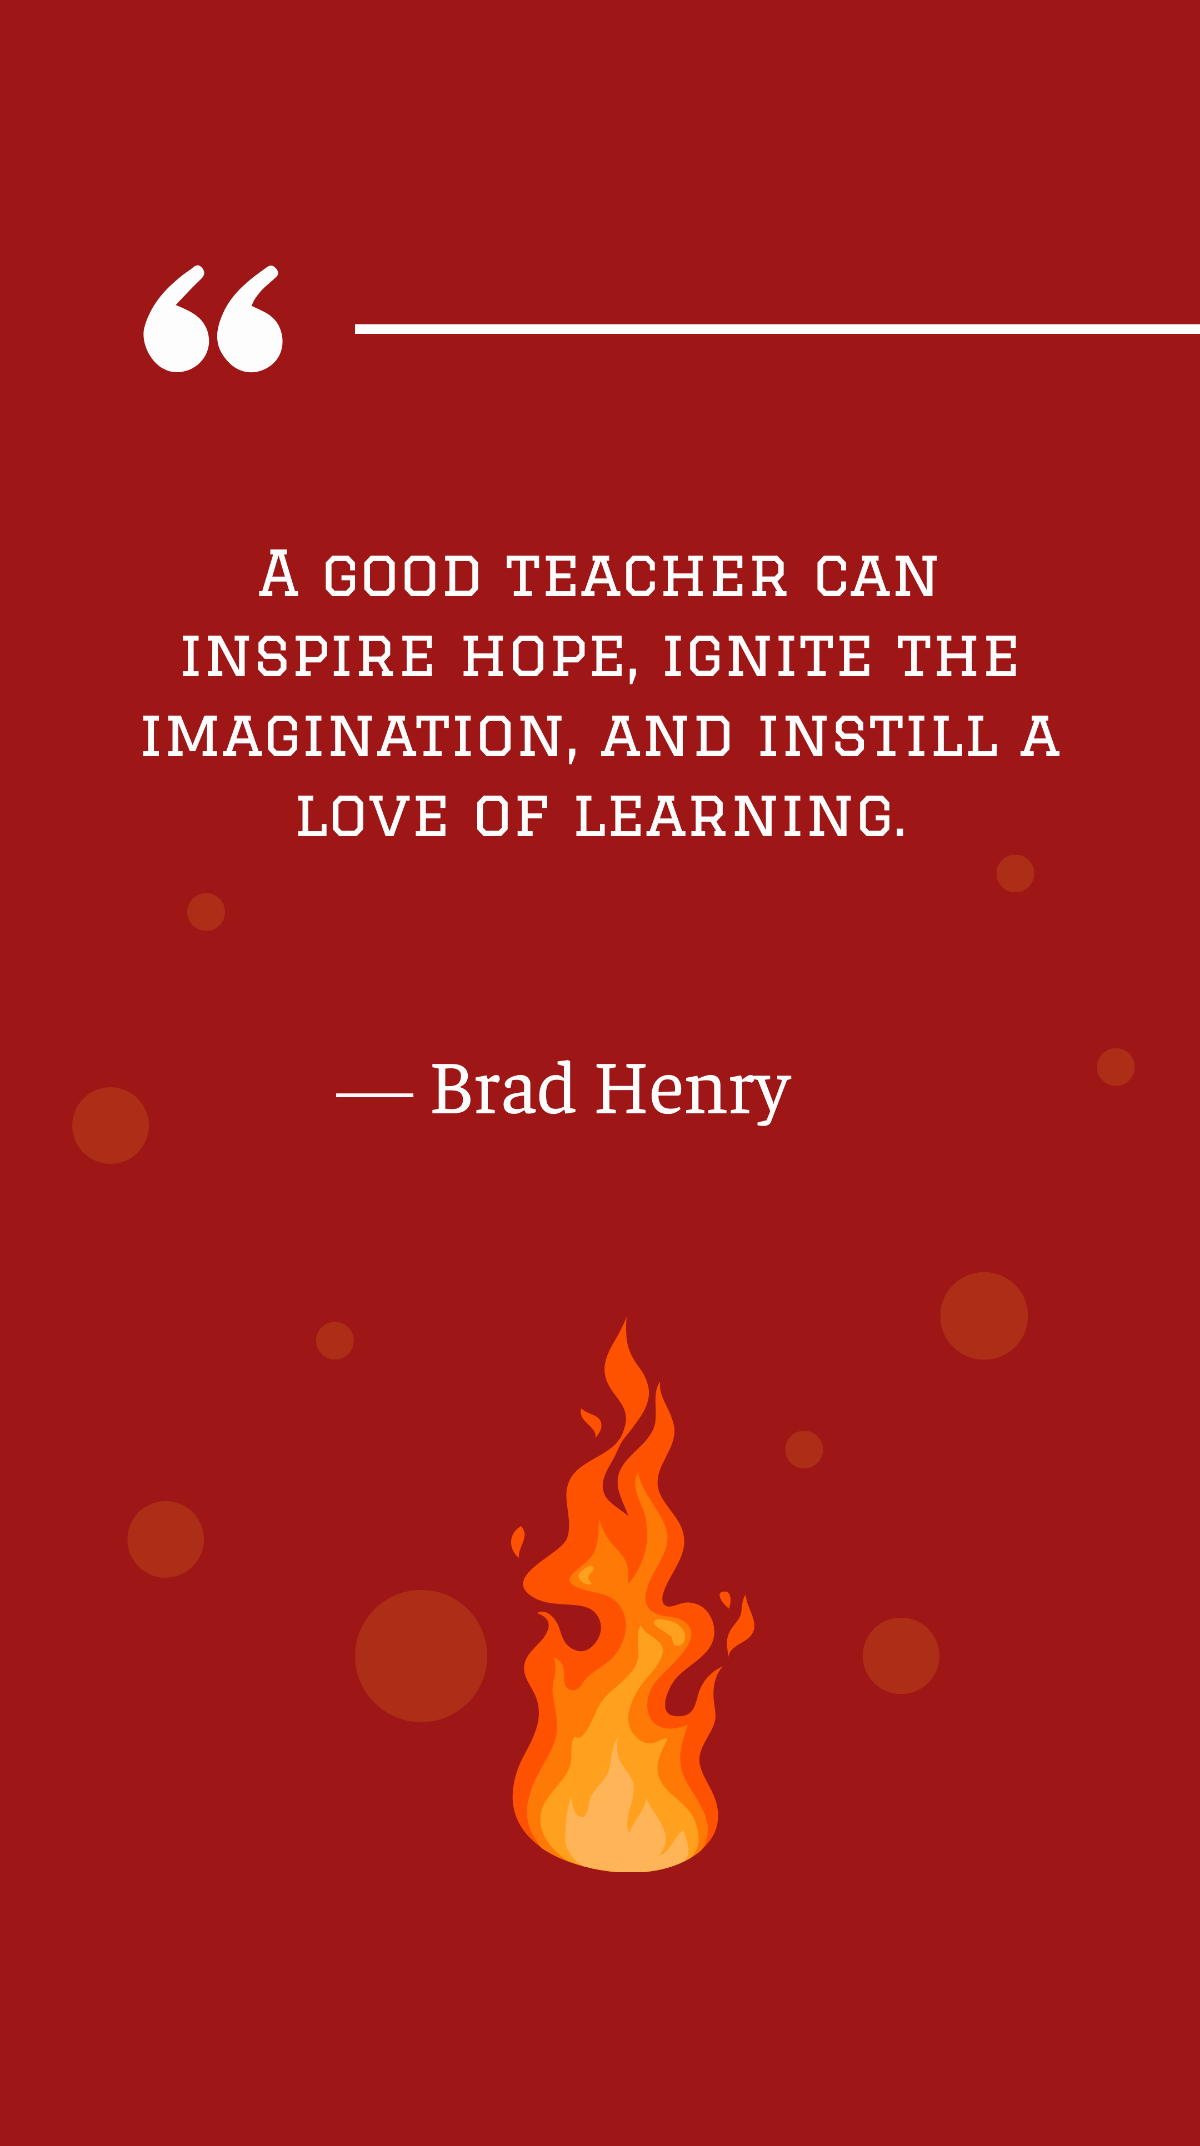 Brad Henry - A good teacher can inspire hope, ignite the imagination, and instill a love of learning. Template